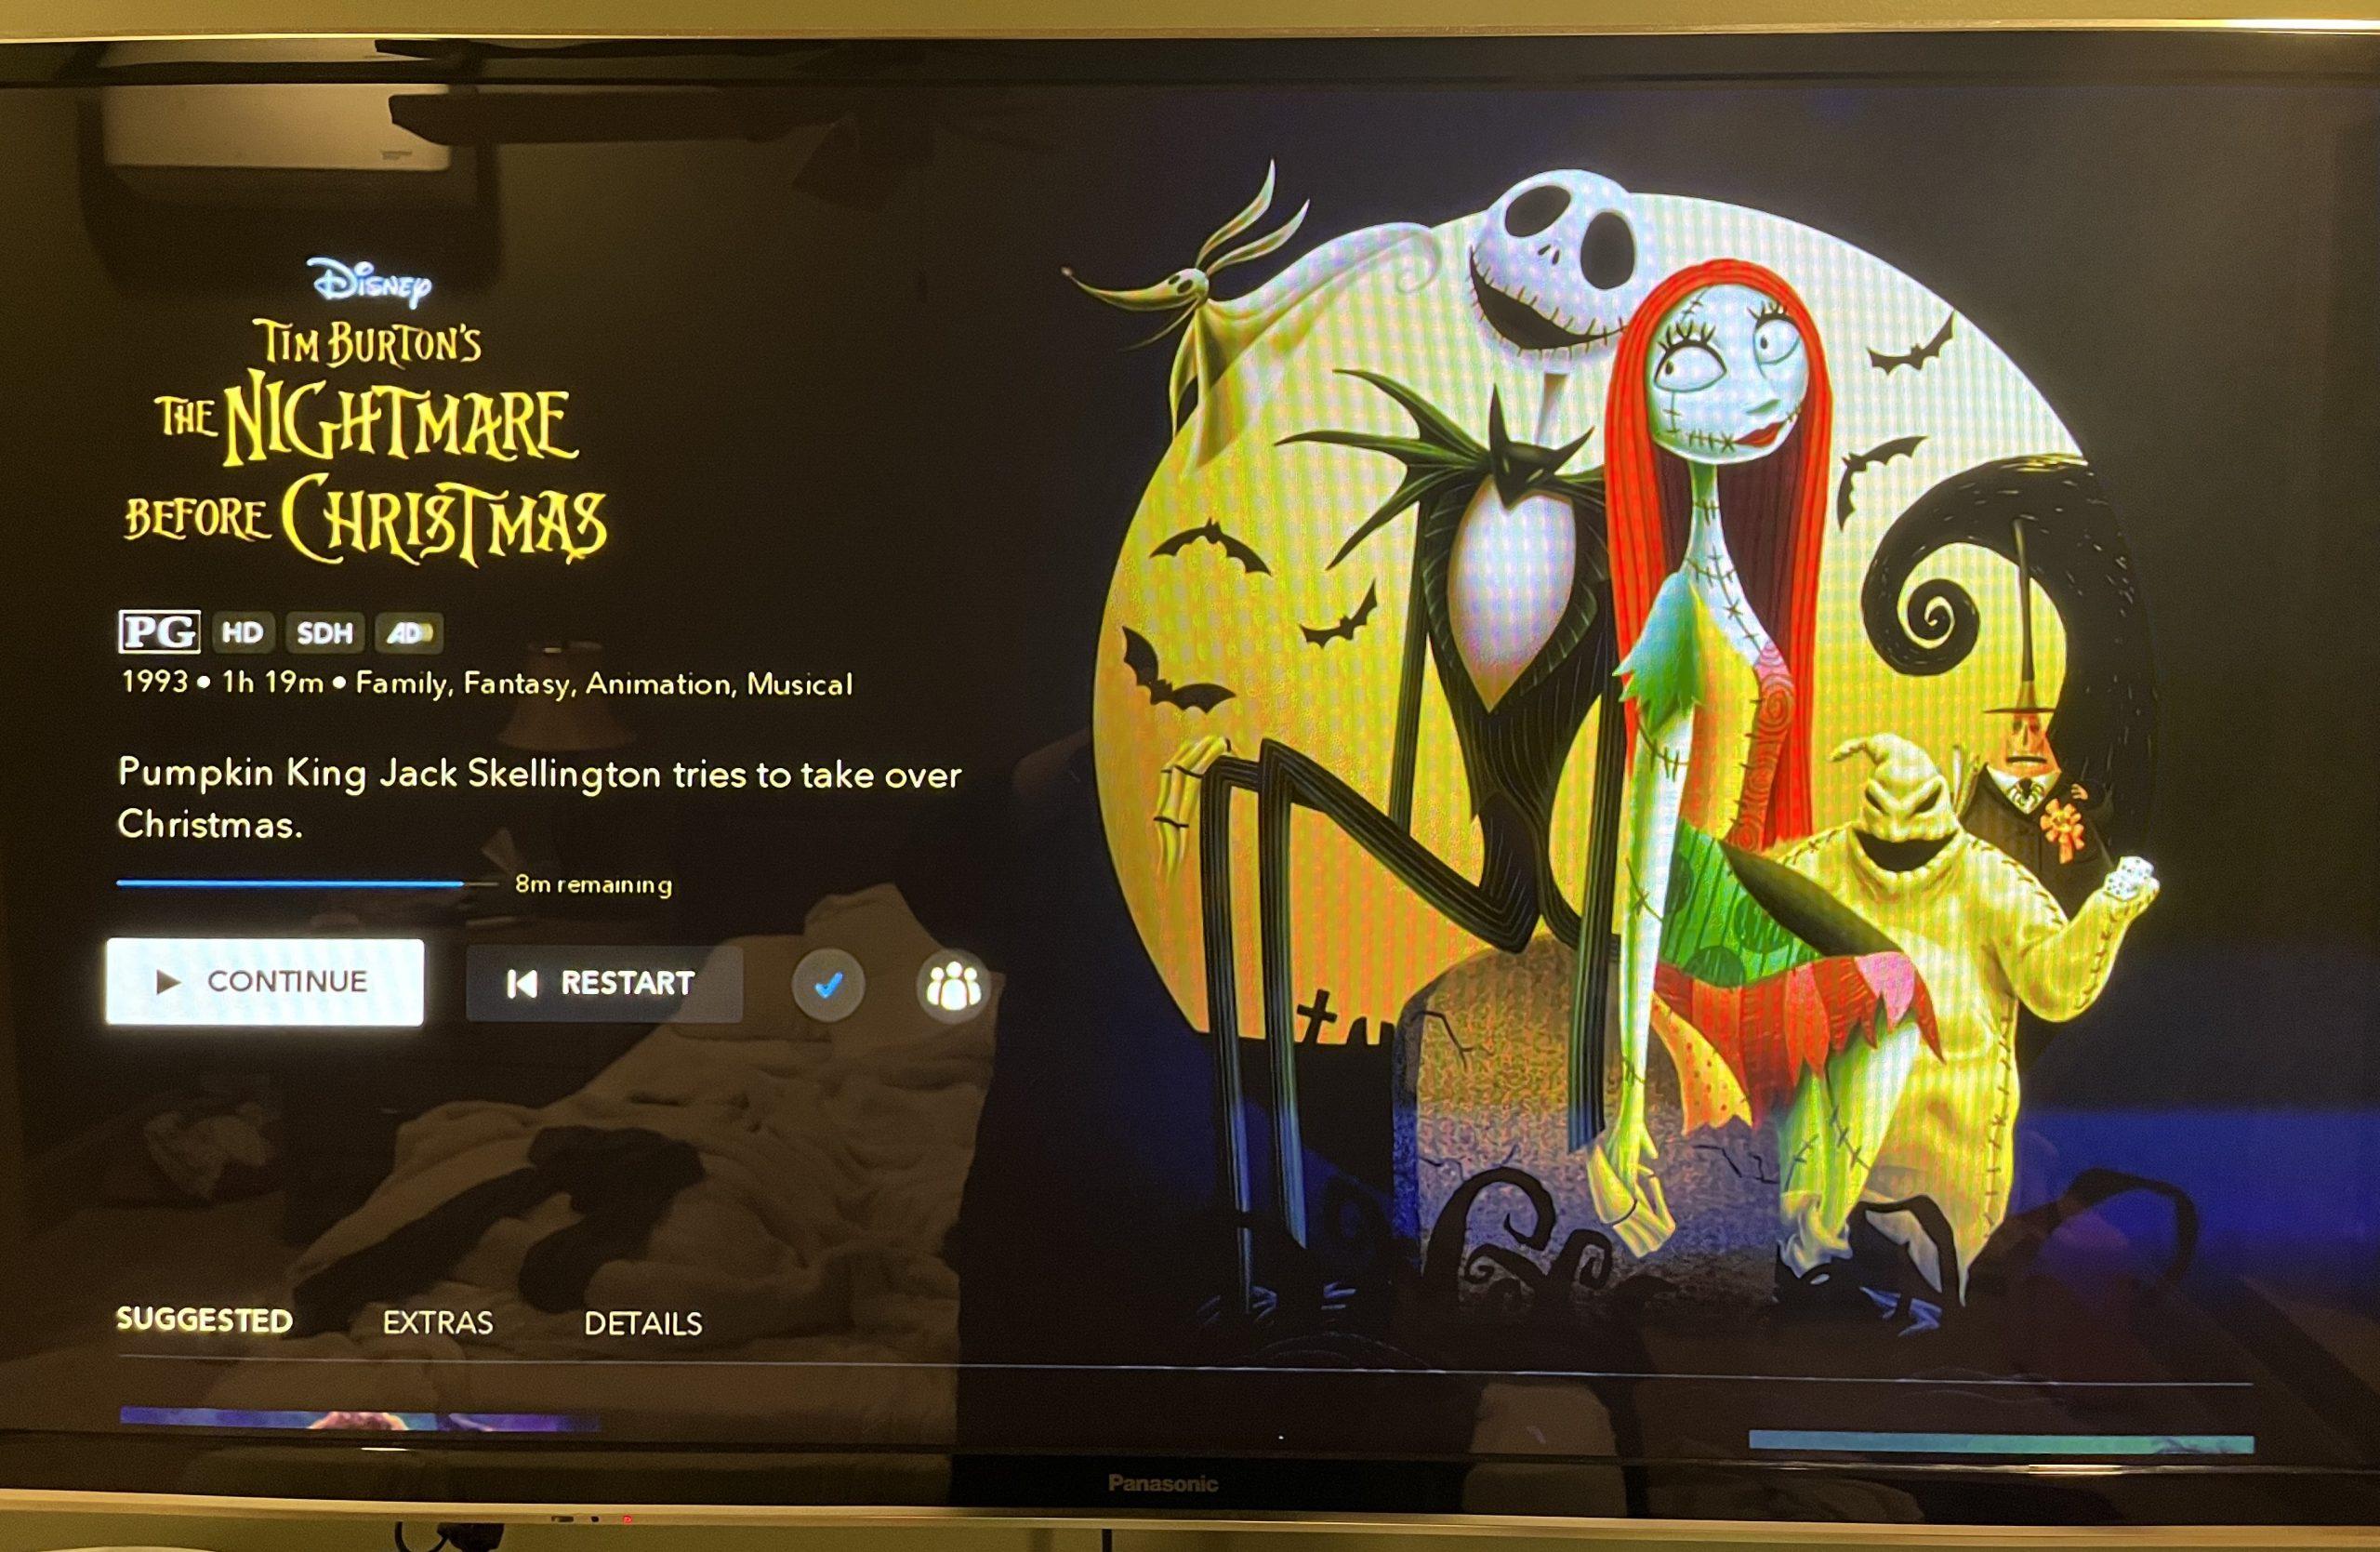 The Nightmare Before Christmas': A Hit That Initially Unnerved